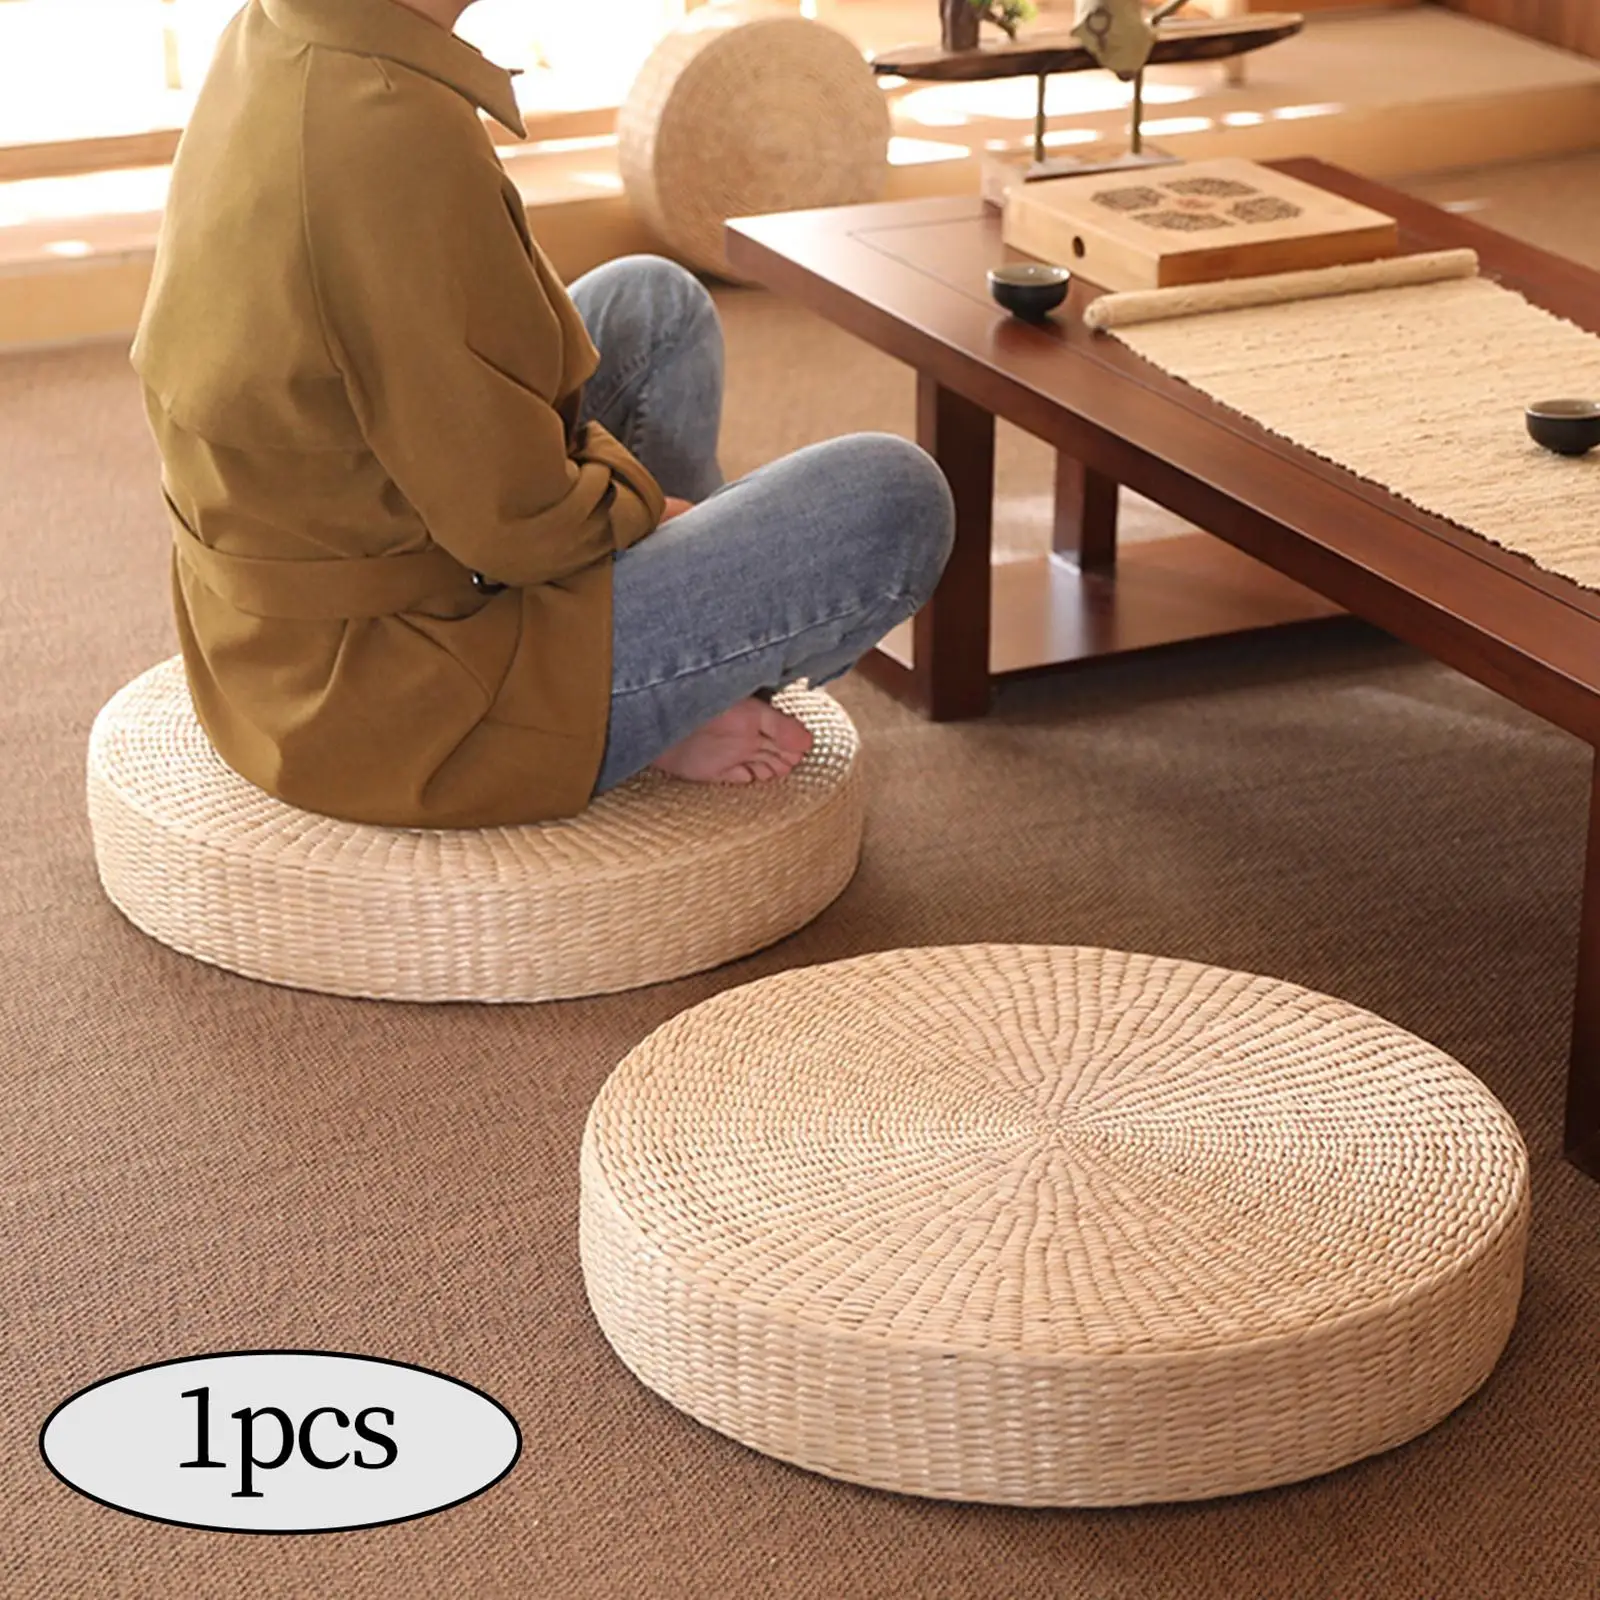 Round Tatami Seat Cushion Pouf Tatami Cushion Floor Pillow Pouf Knitted Tatami Cushion for Garden Dining Room Decoration